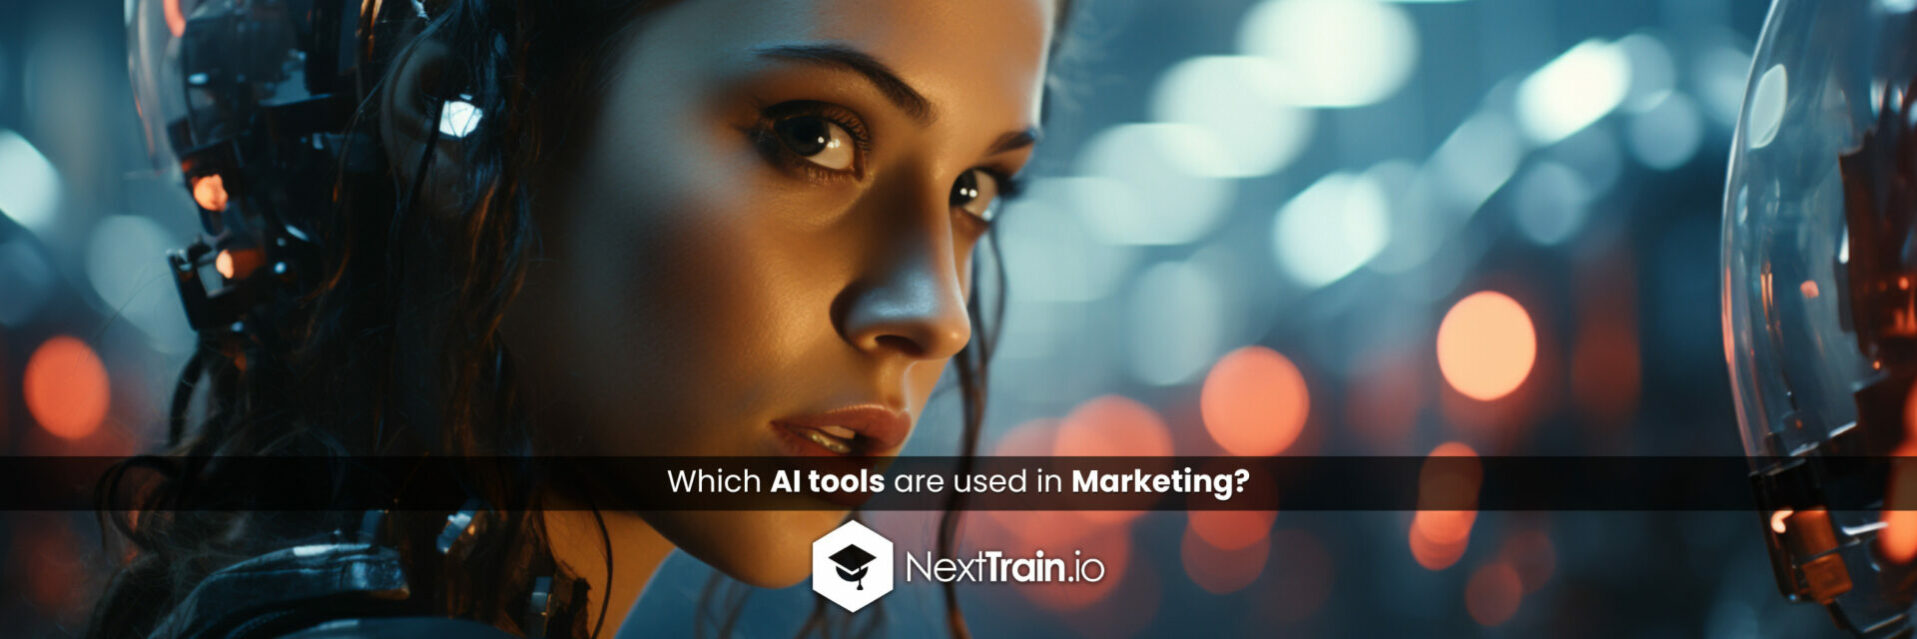 Which AI tools are used in Marketing?